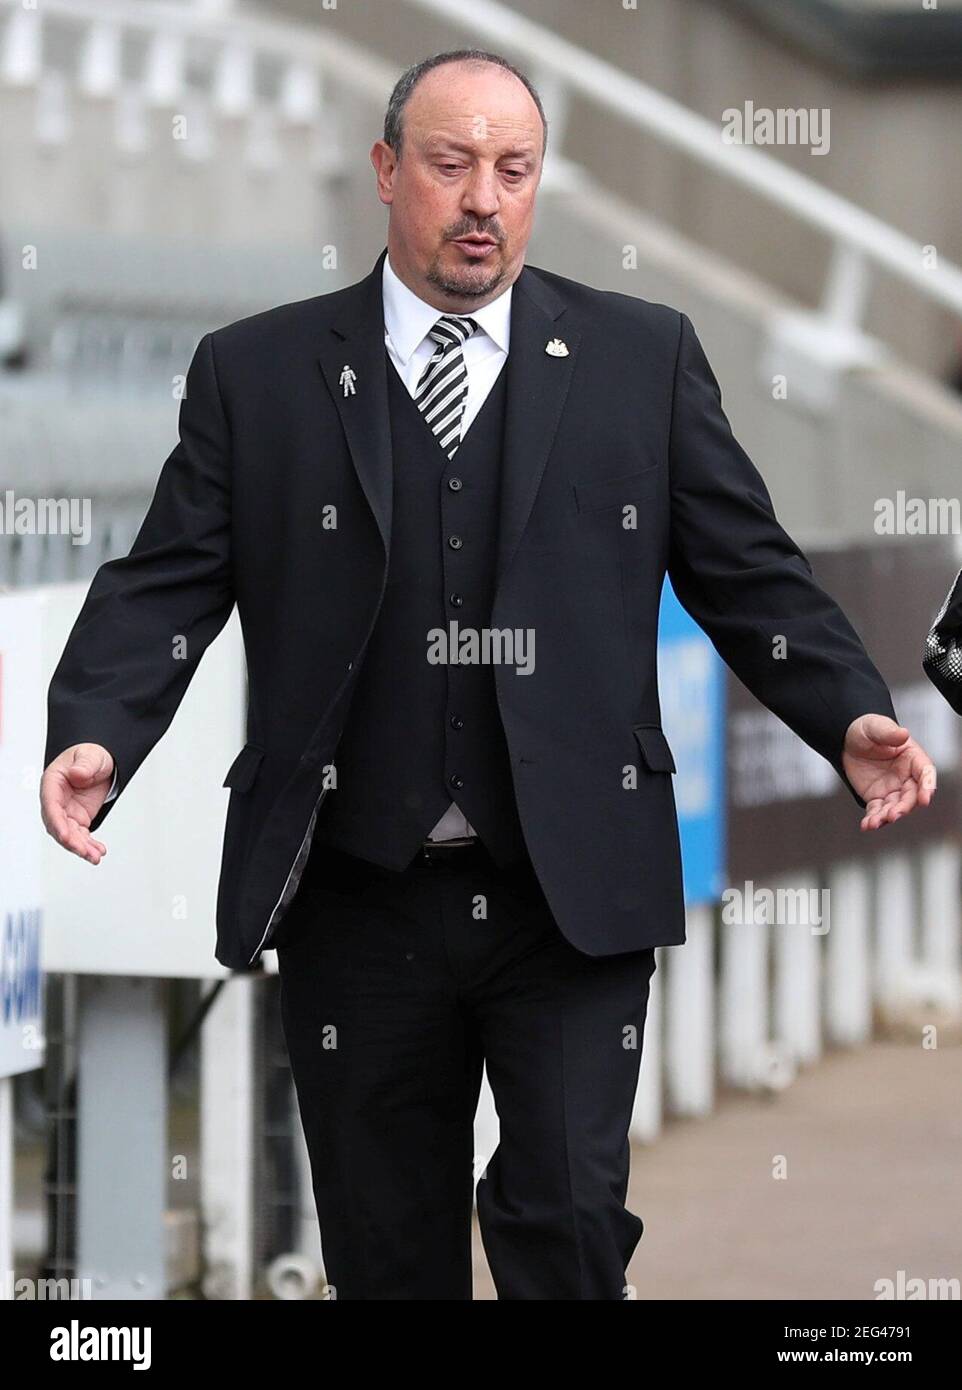 Soccer Football - Premier League - Newcastle United vs Chelsea - St James' Park, Newcastle, Britain - May 13, 2018   Newcastle United manager Rafael Benitez before the match   REUTERS/Scott Heppell    EDITORIAL USE ONLY. No use with unauthorized audio, video, data, fixture lists, club/league logos or 'live' services. Online in-match use limited to 75 images, no video emulation. No use in betting, games or single club/league/player publications.  Please contact your account representative for further details. Stock Photo